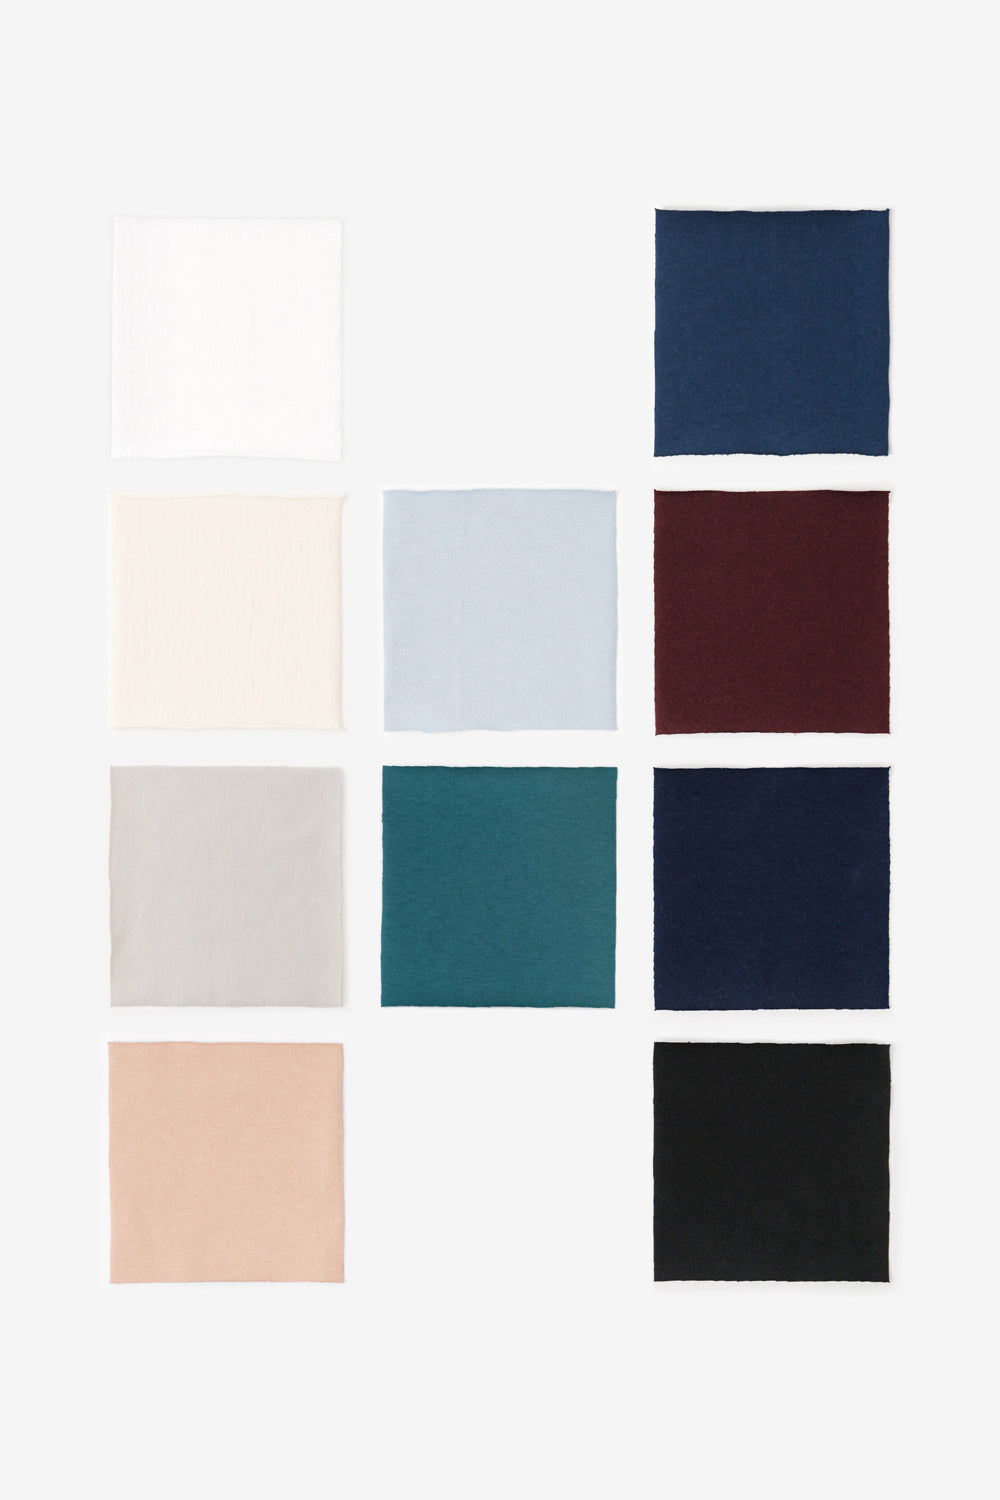 The School of Making organic cotton fabric swatches in assorted colors.